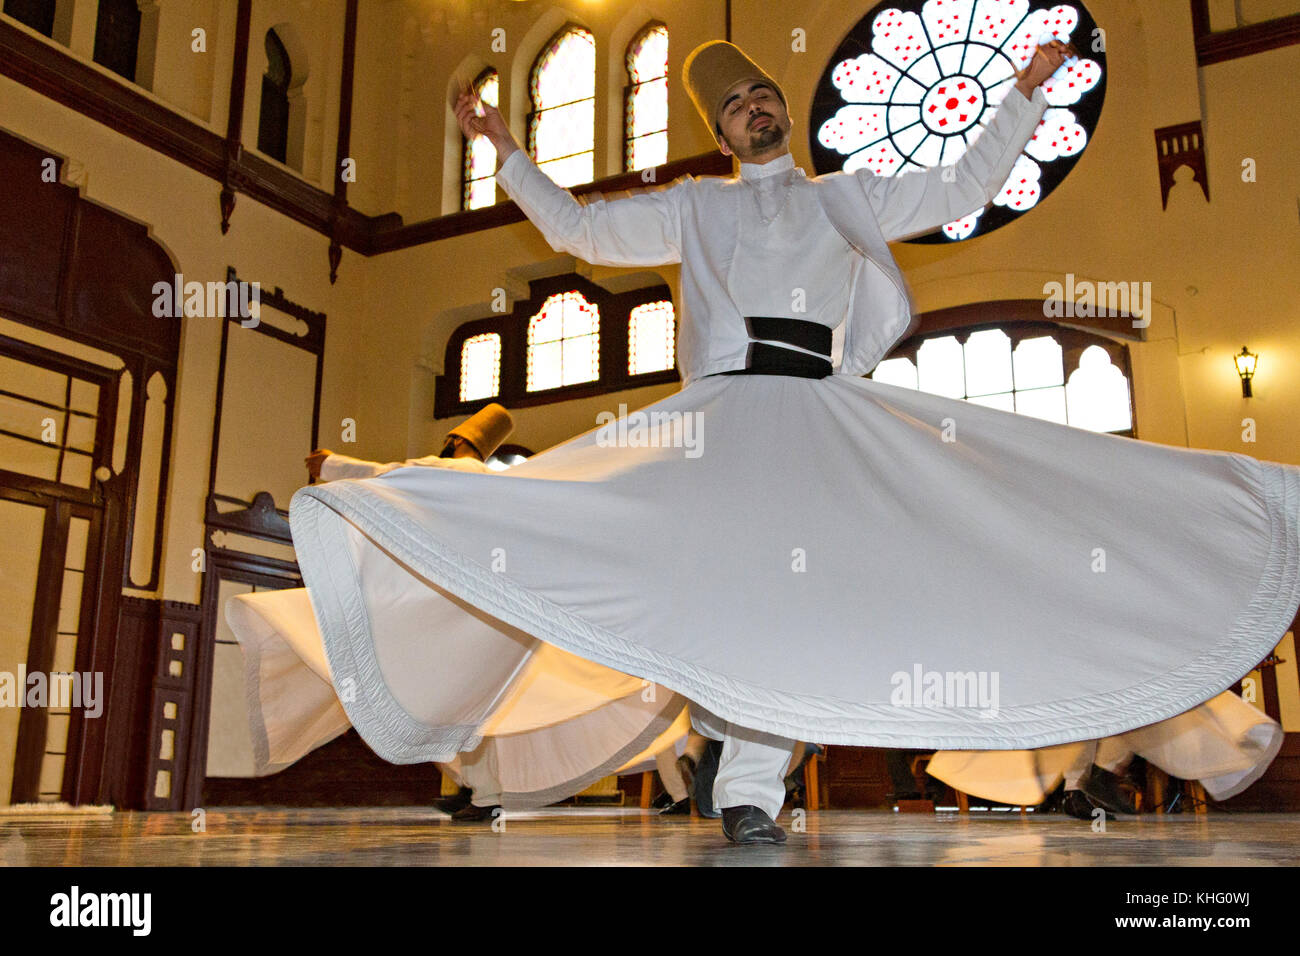 Whirling dervish during sufi whirling ritual known as Sema, in Istanbul, Turkey Stock Photo